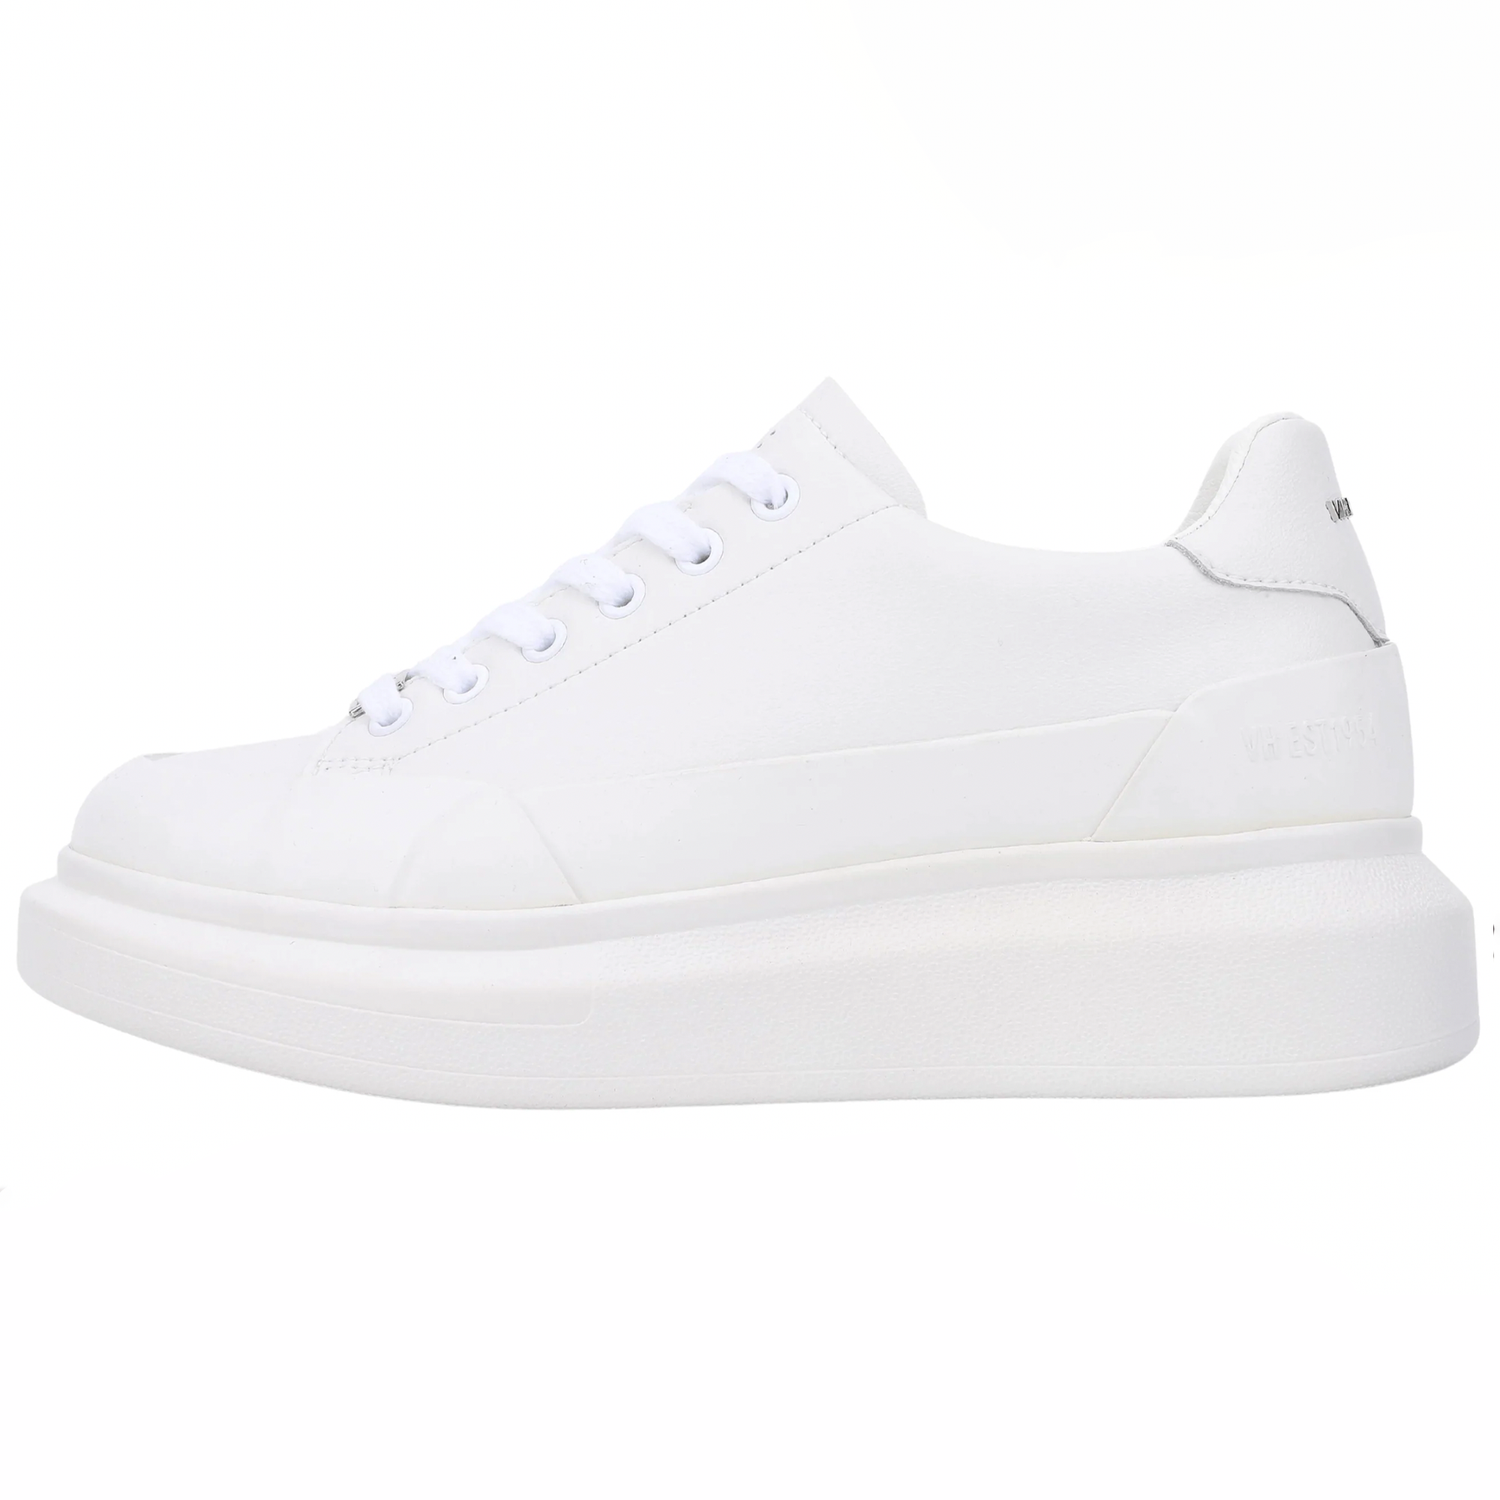 Vintage Havana Angela Sneaker. This sneaker is a must-have this season! The all white shoe is perfect to pair with literally any outfit. The shoe features a low-profile, round toe, and a textile upper